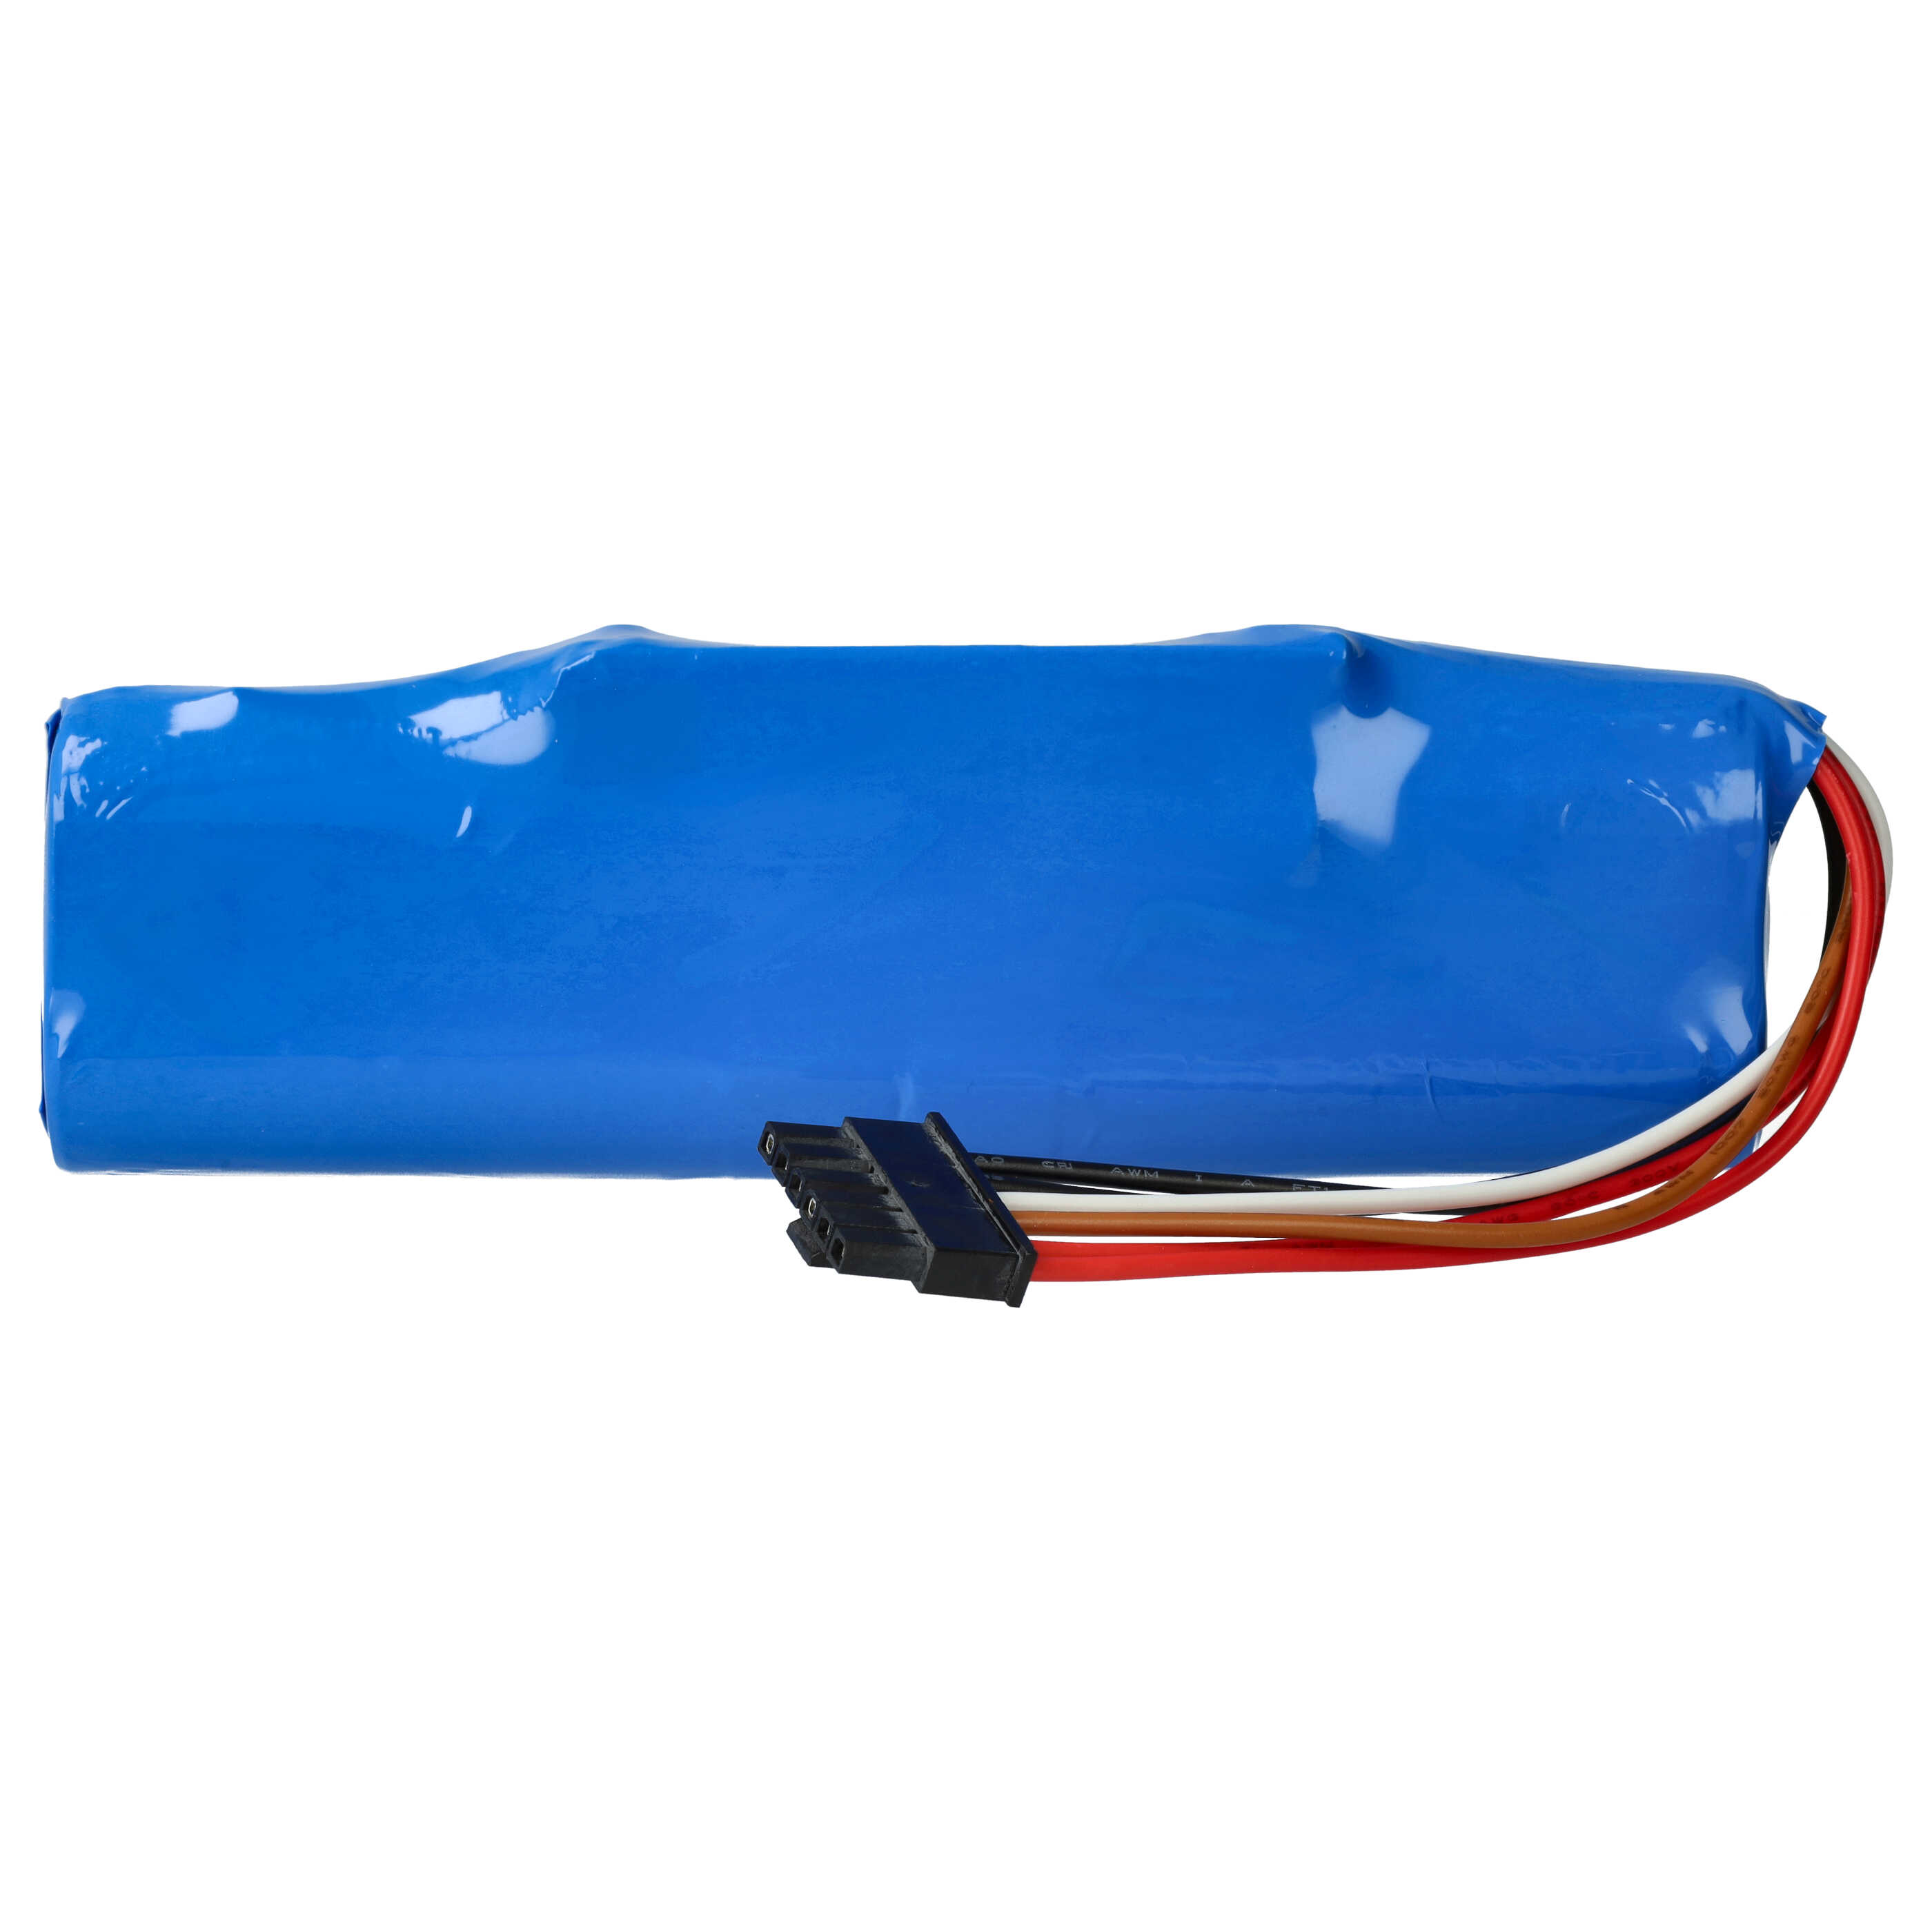 Mobile PC Battery Replacement for Honeywell 50139885-001, L3-52301624A-R, 50121692-001 - 6800mAh 7.4V Li-Ion